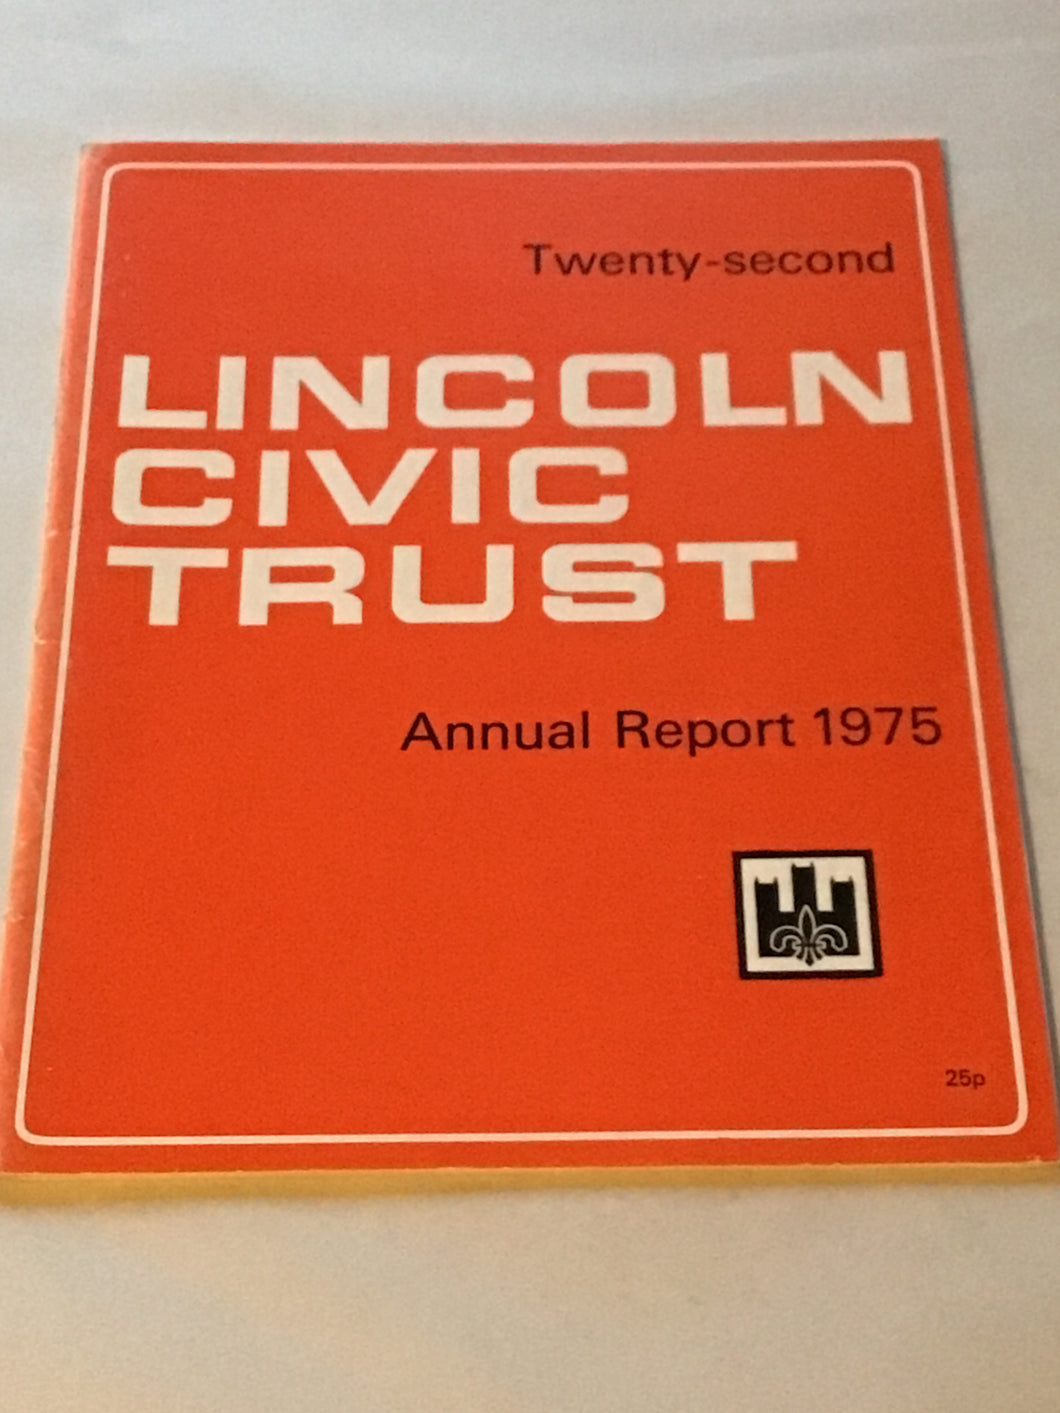 22nd Lincoln Civic trust and report 1975